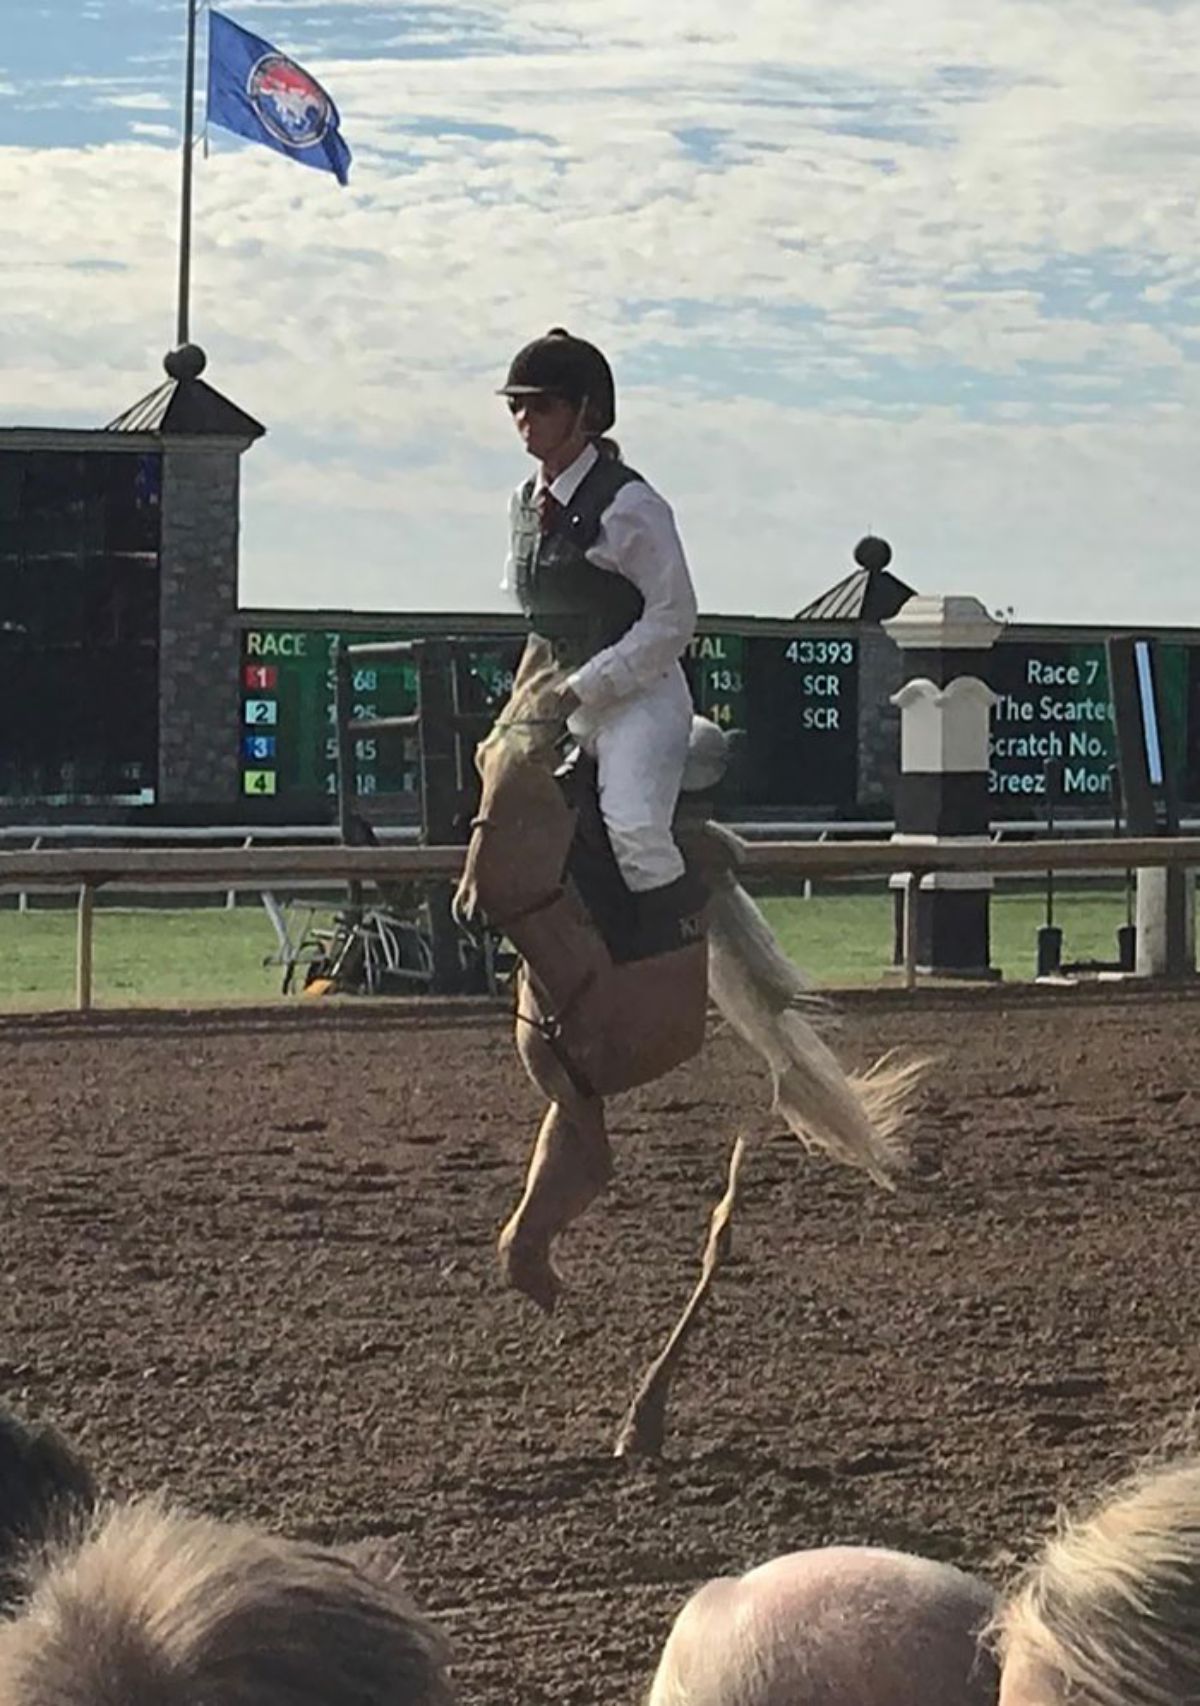 panoramic fail of brown horse with a jockey on top and the horse has 1 leg attached to the body, and a free-floating tail and leg